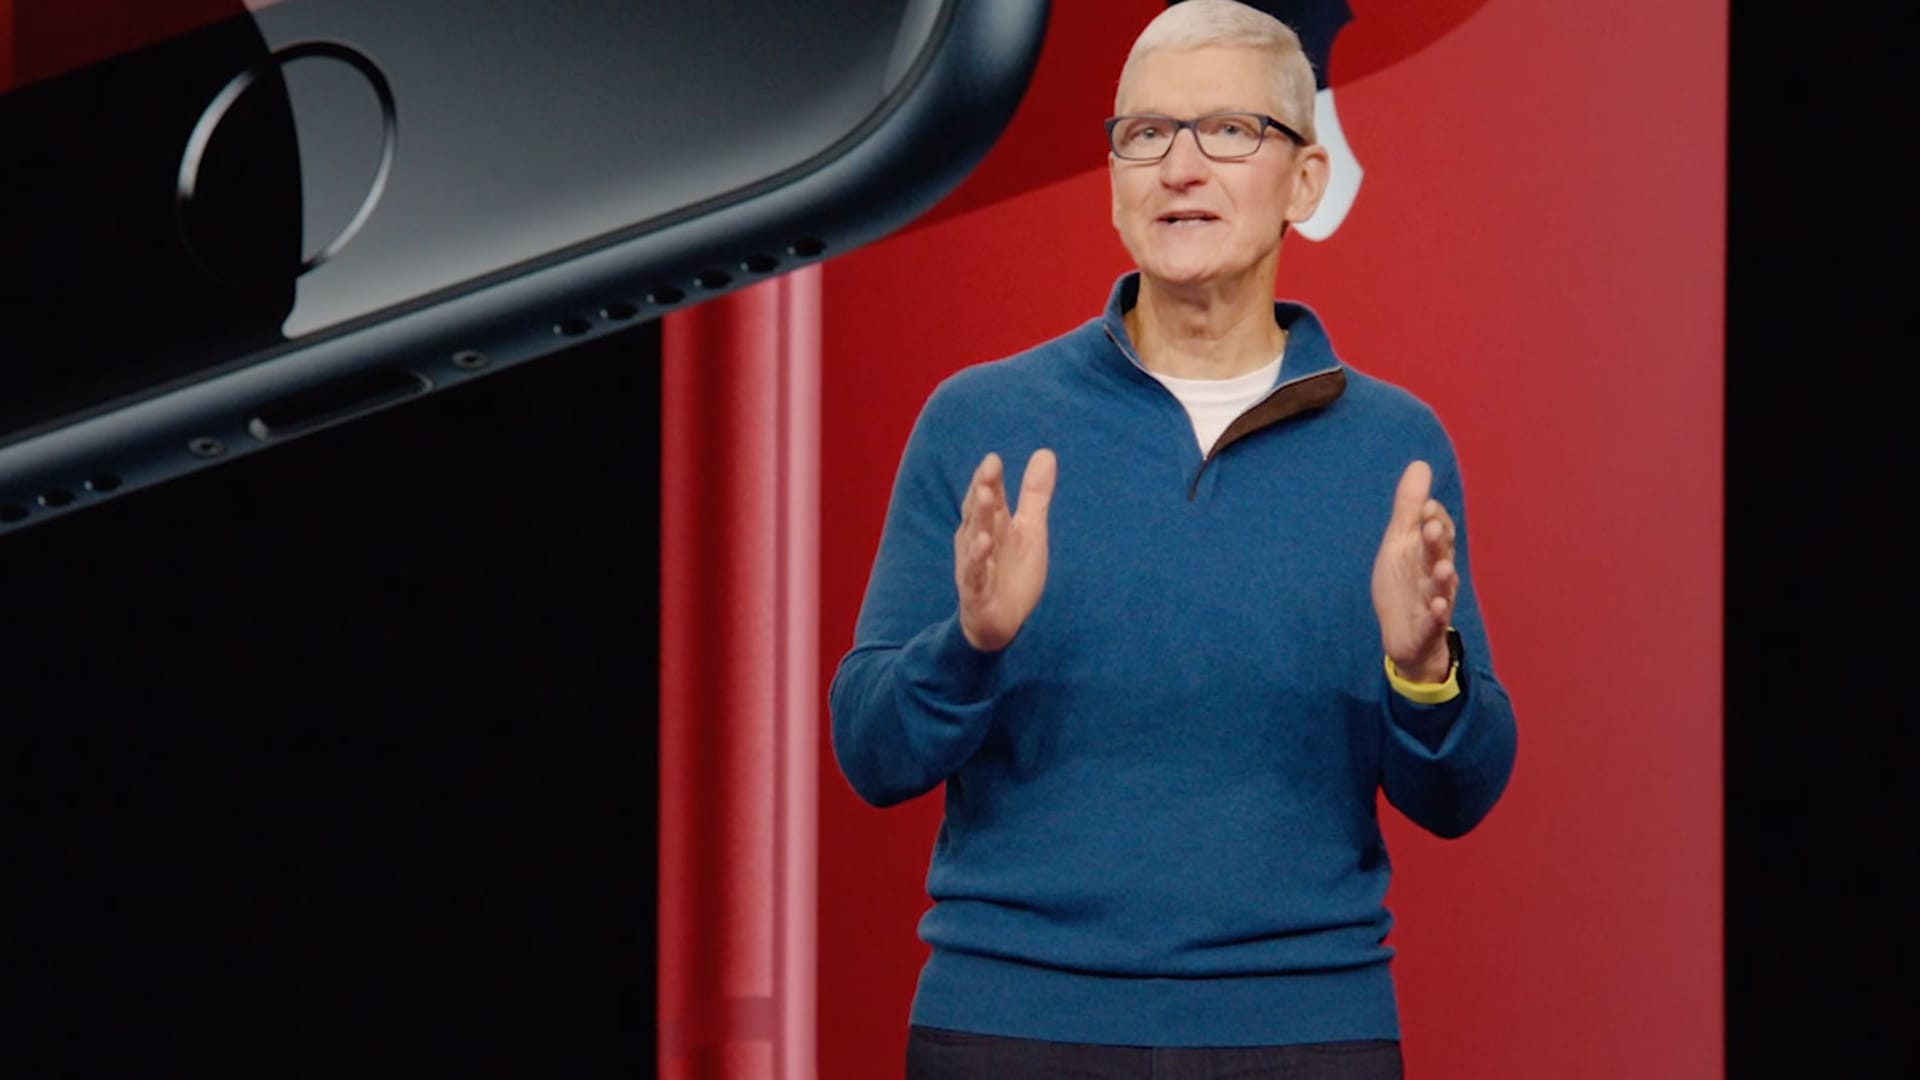 Tim Cook at the Apple launch event, March 8, 2022